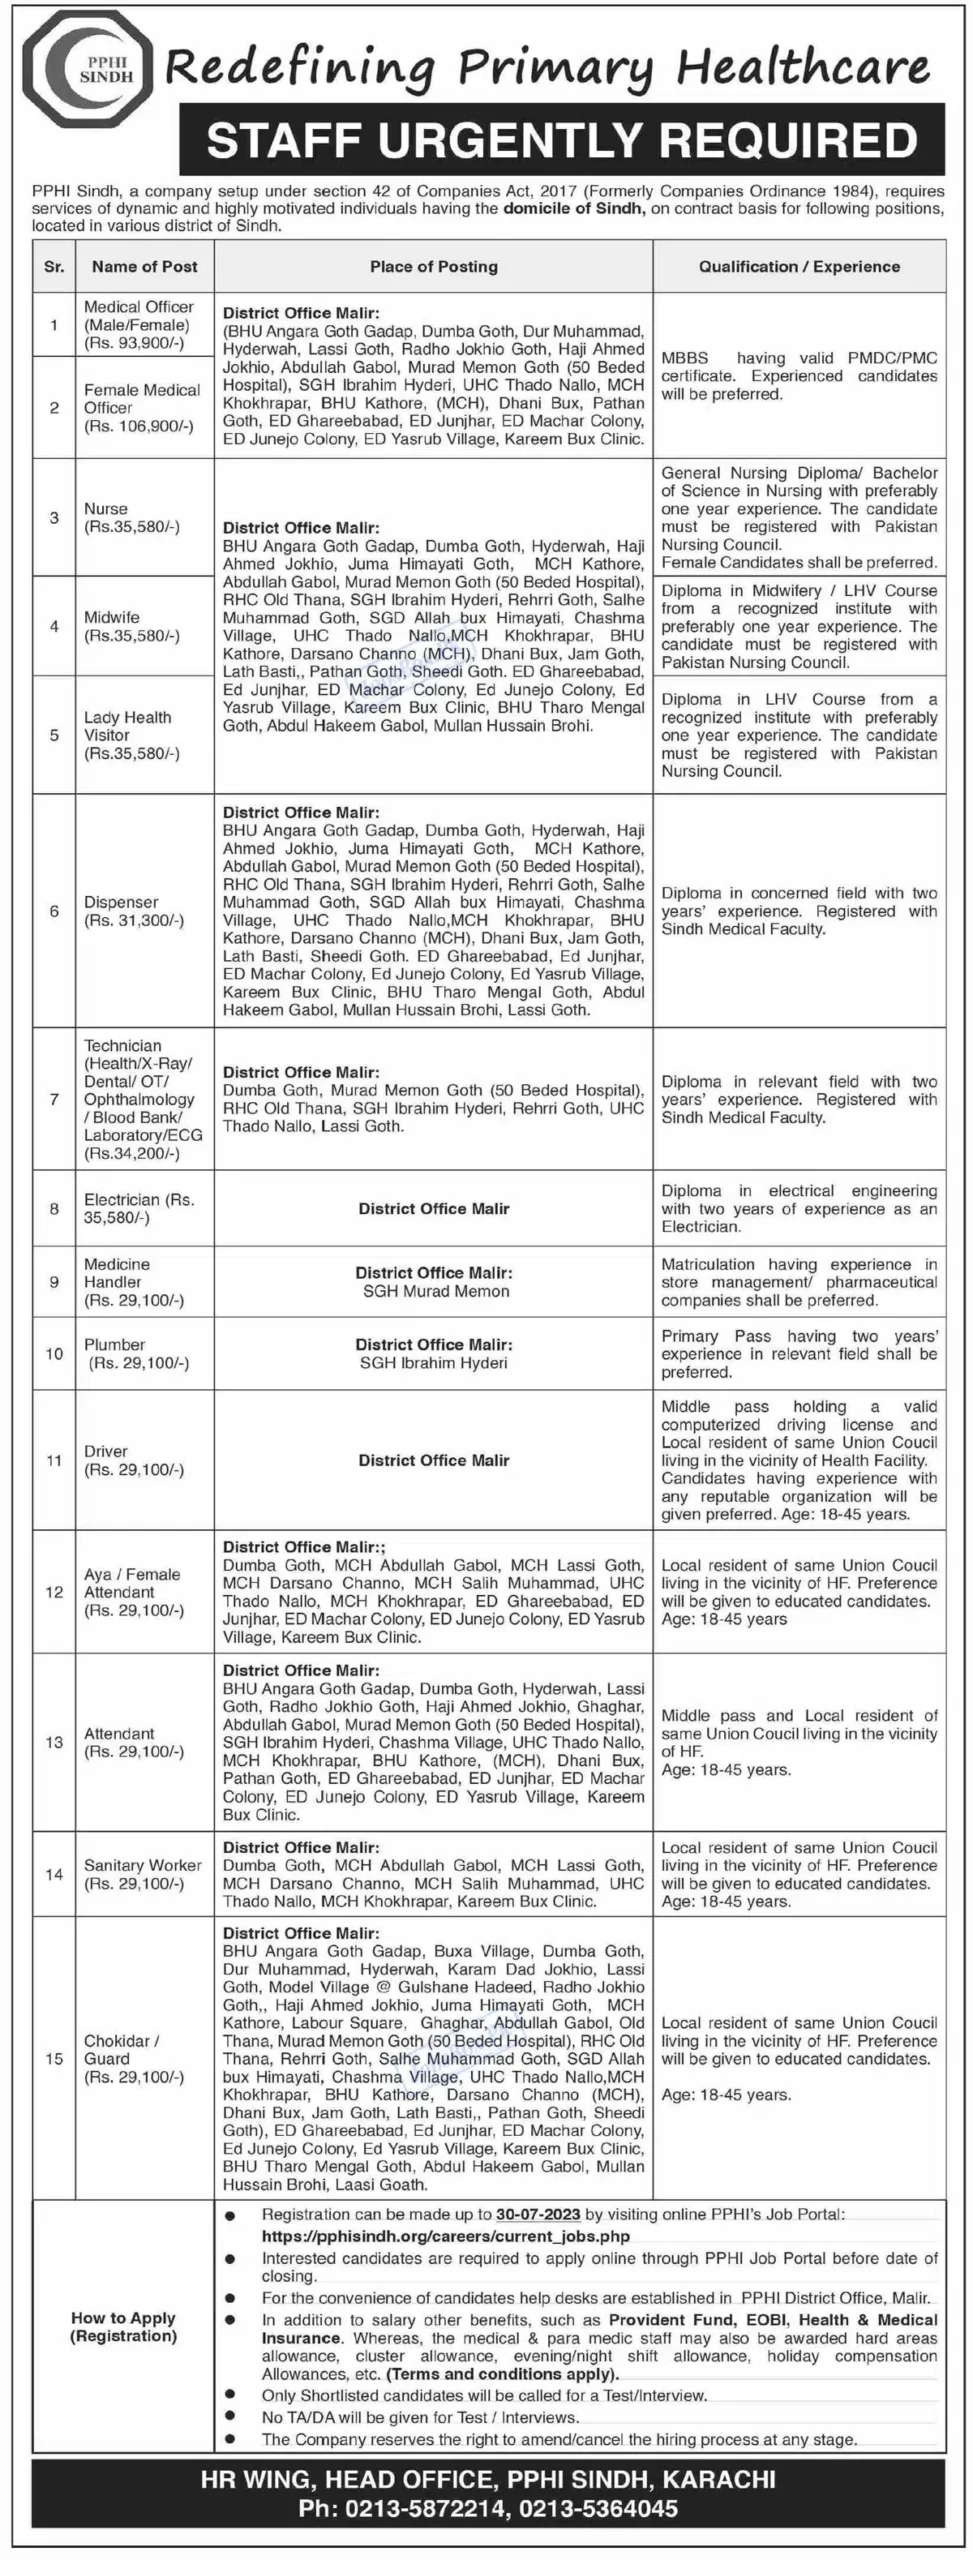 People Primary Health Initiative PPHI Sindh Jobs 2023 –Online Application